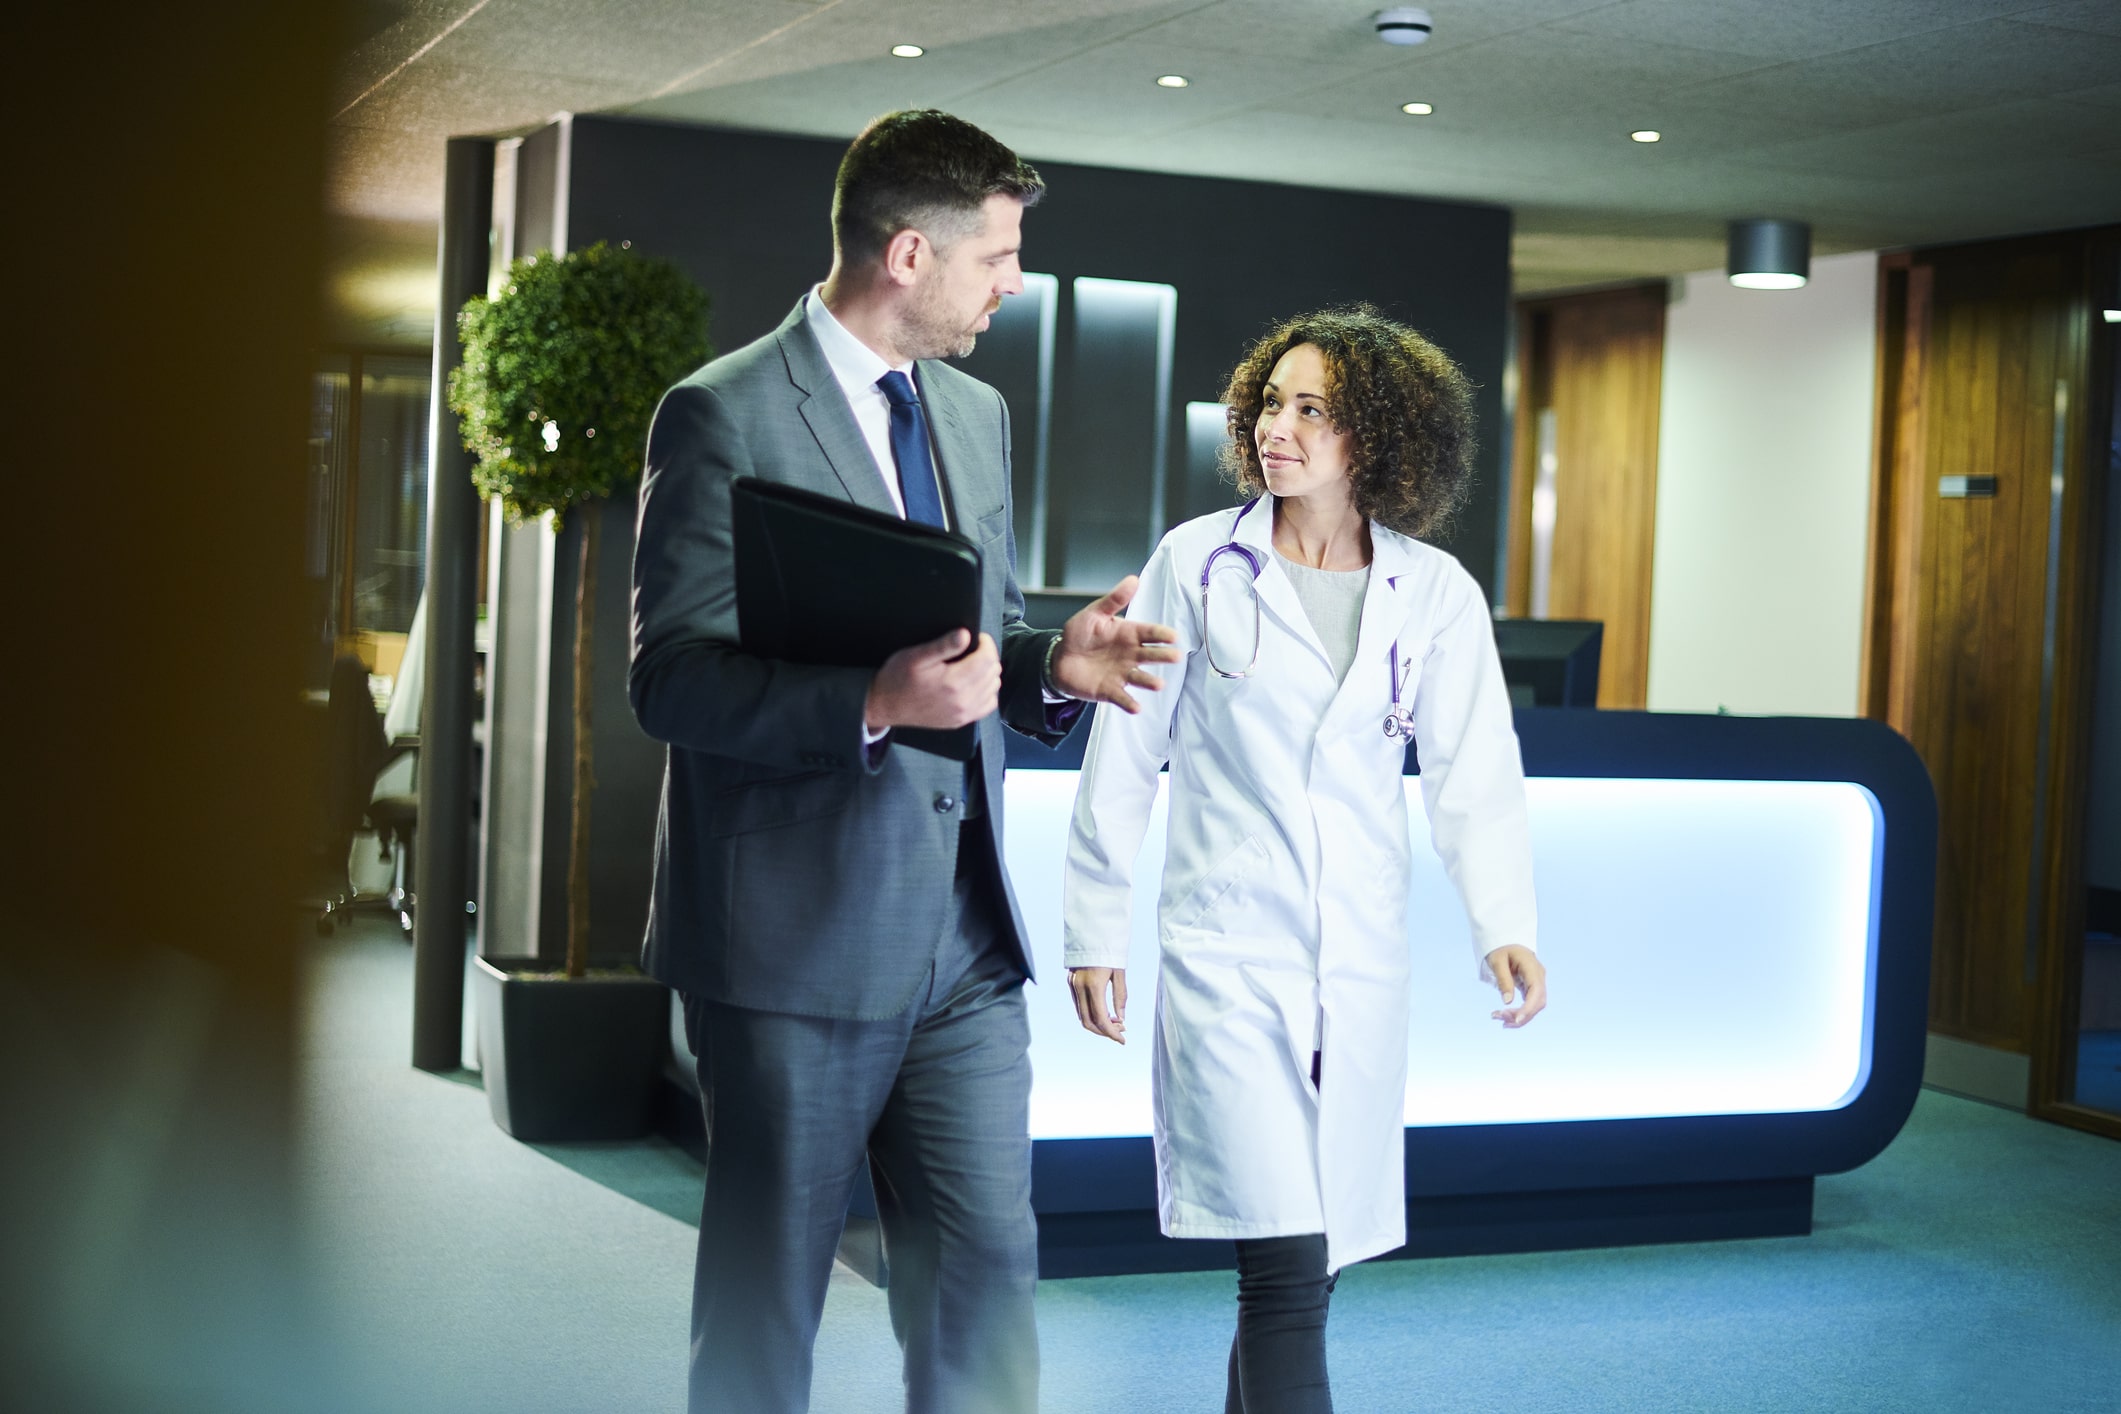 consultant and doctor walk and discuss in hospital